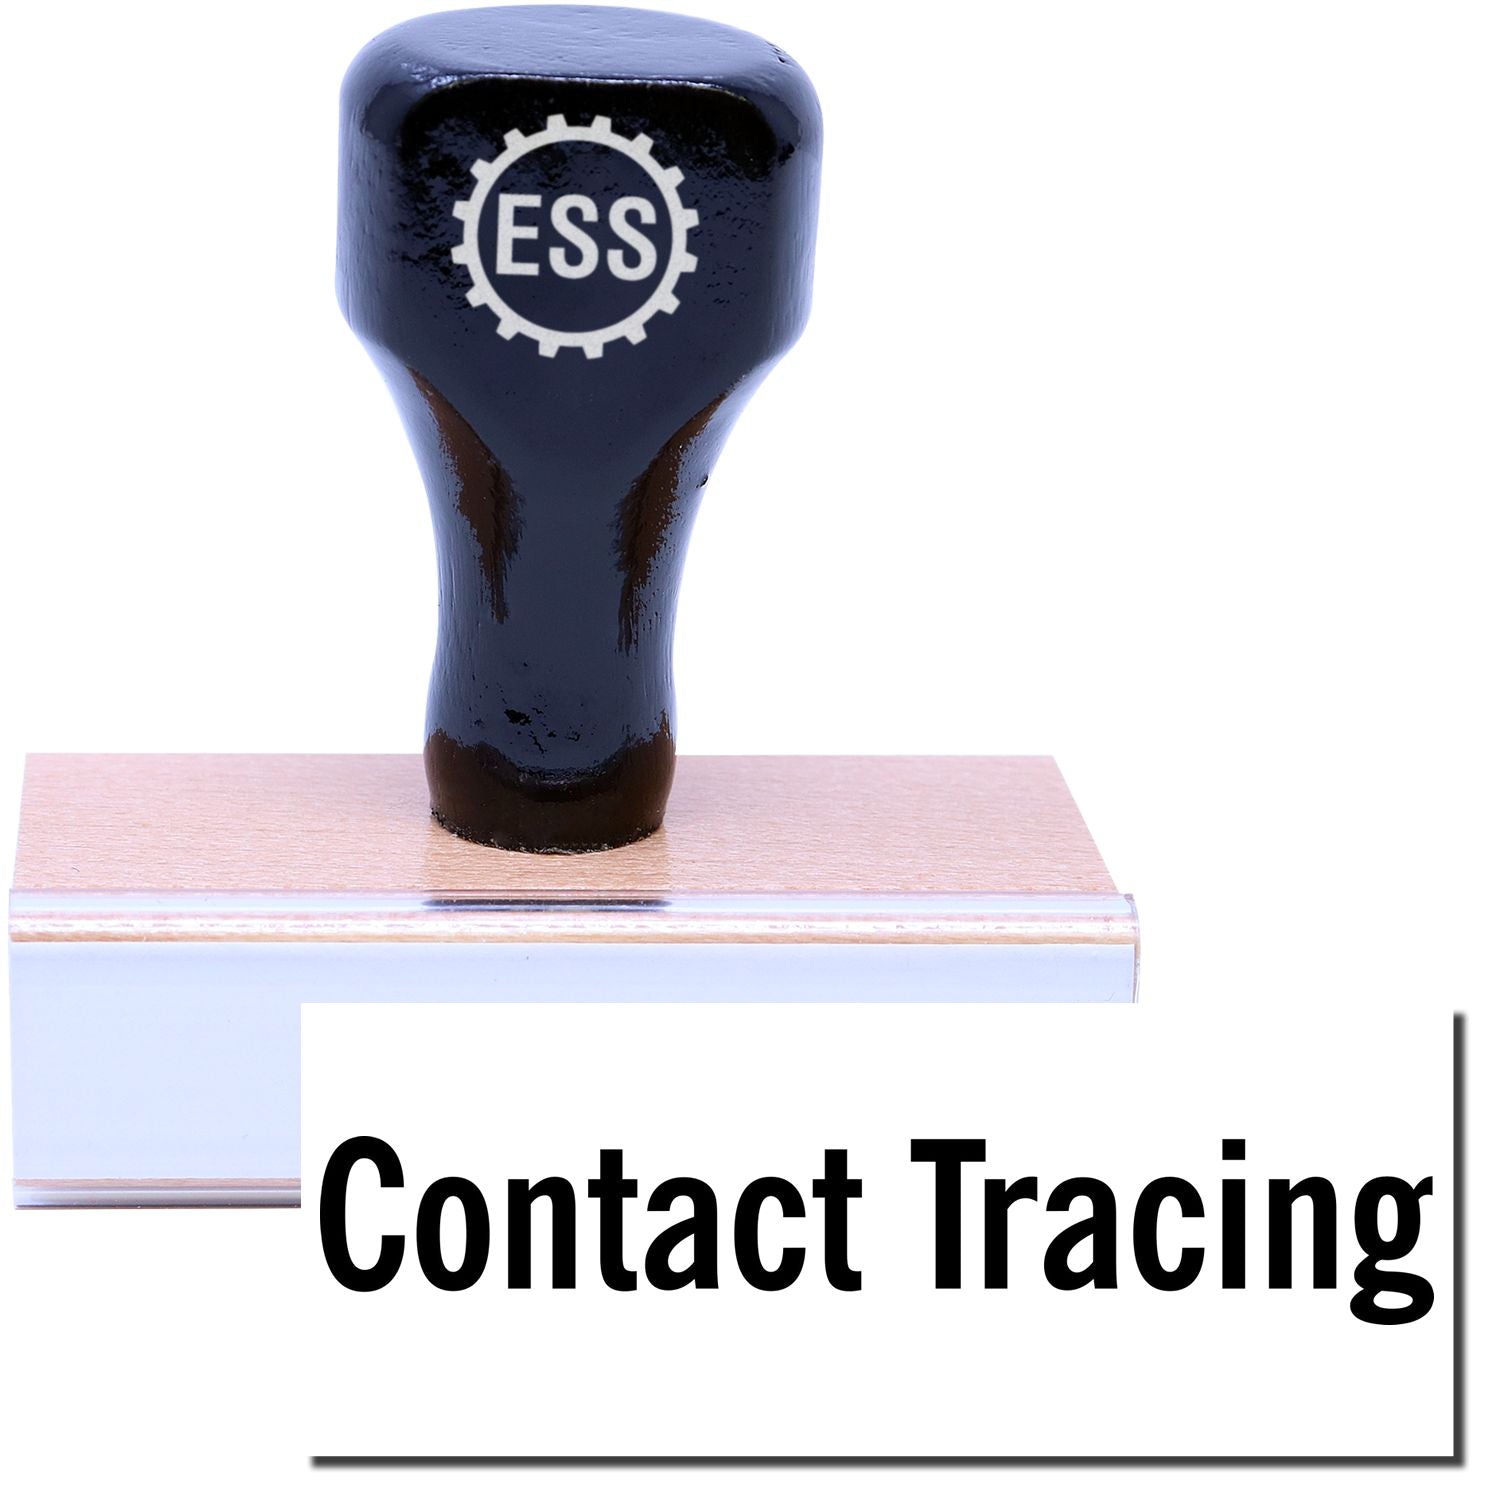 A stock office rubber stamp with a stamped image showing how the text "Contact Tracing" is displayed after stamping.